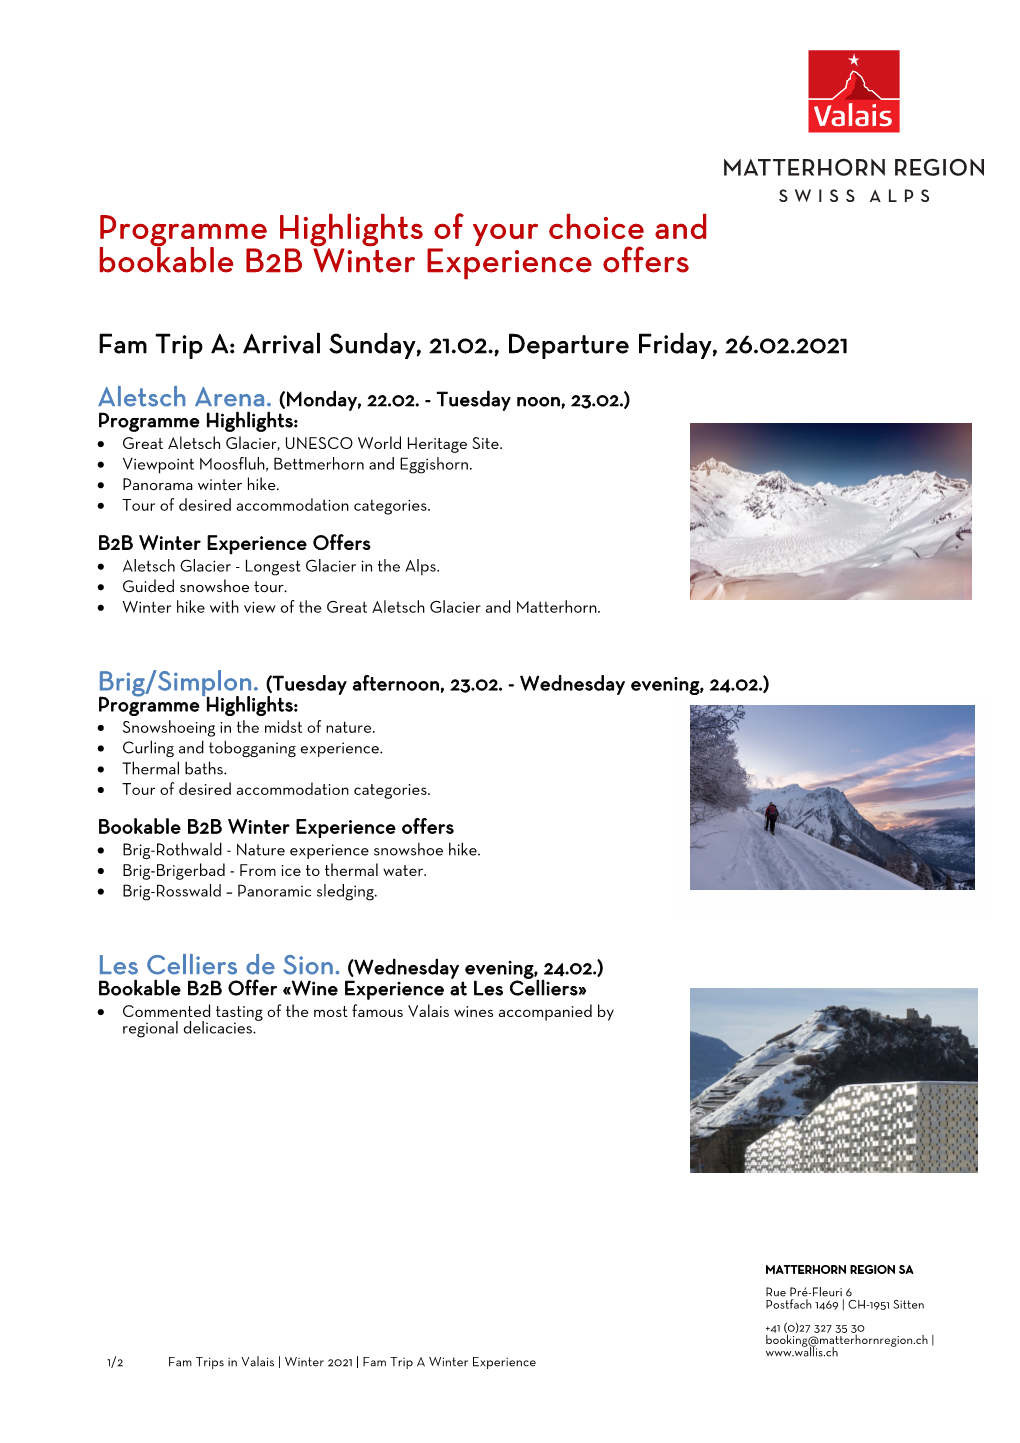 Programme Highlights of Your Choice and Bookable B2B Winter Experience Offers